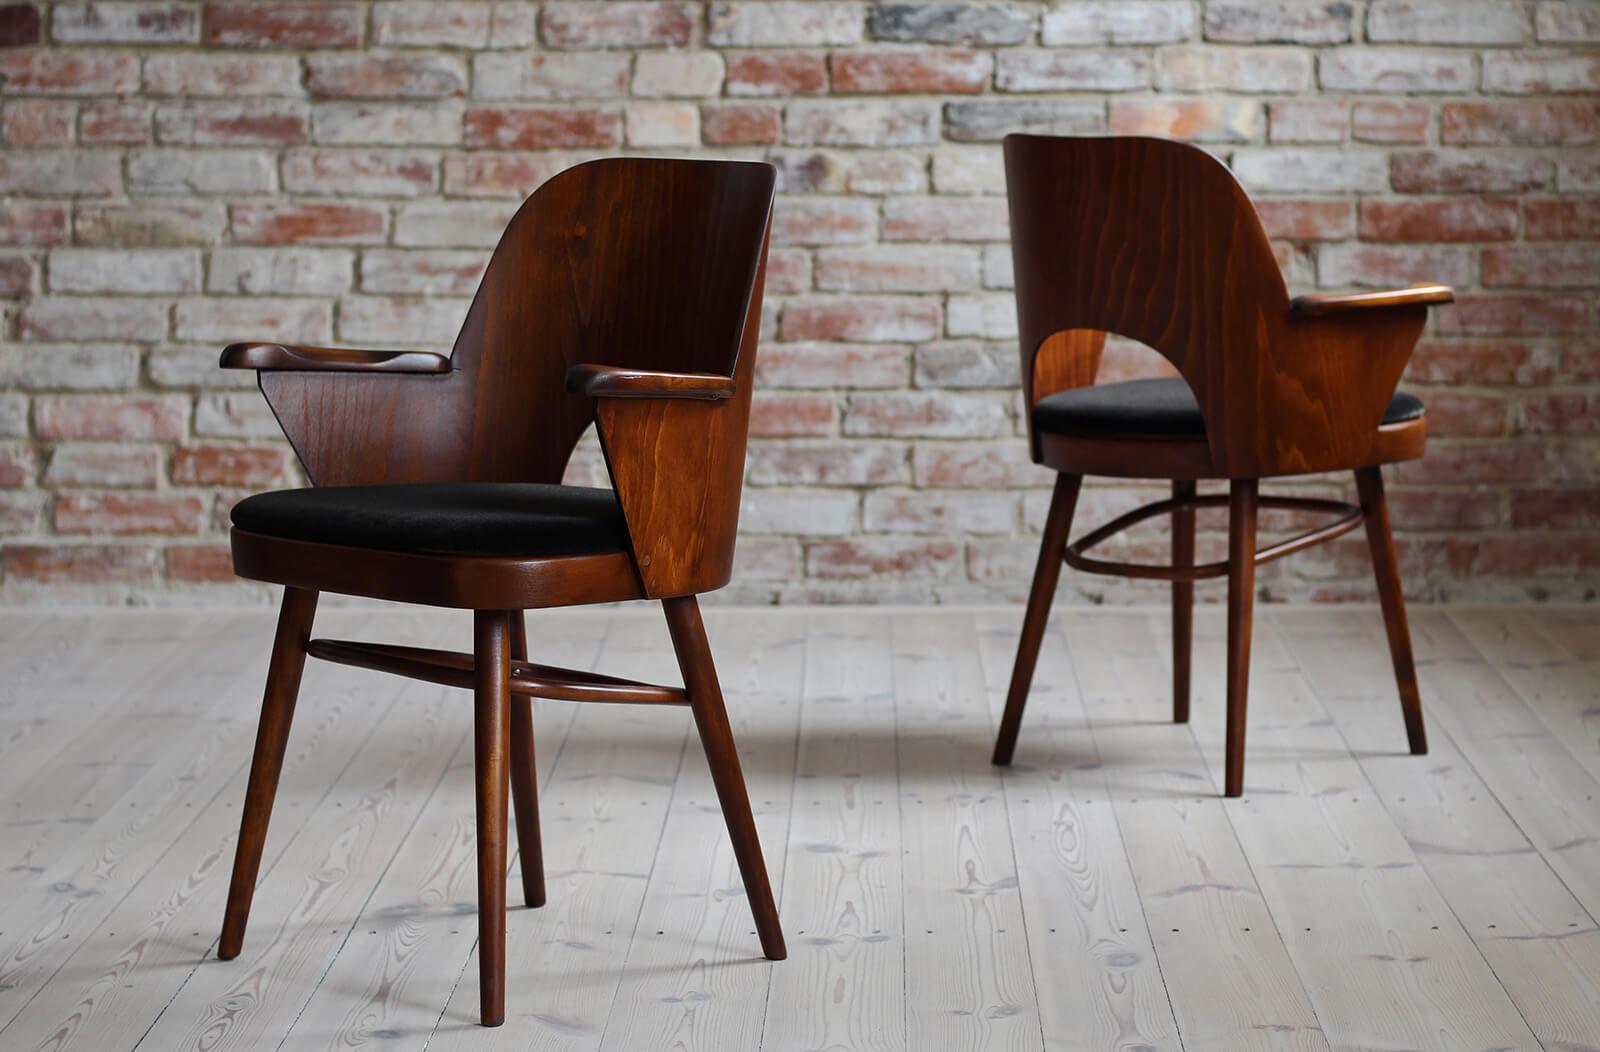 Set of 4 Midcentury Dining Chairs by L. Hofmann, Reupholstered in Kvadrat Fabric In Good Condition In Wrocław, Poland